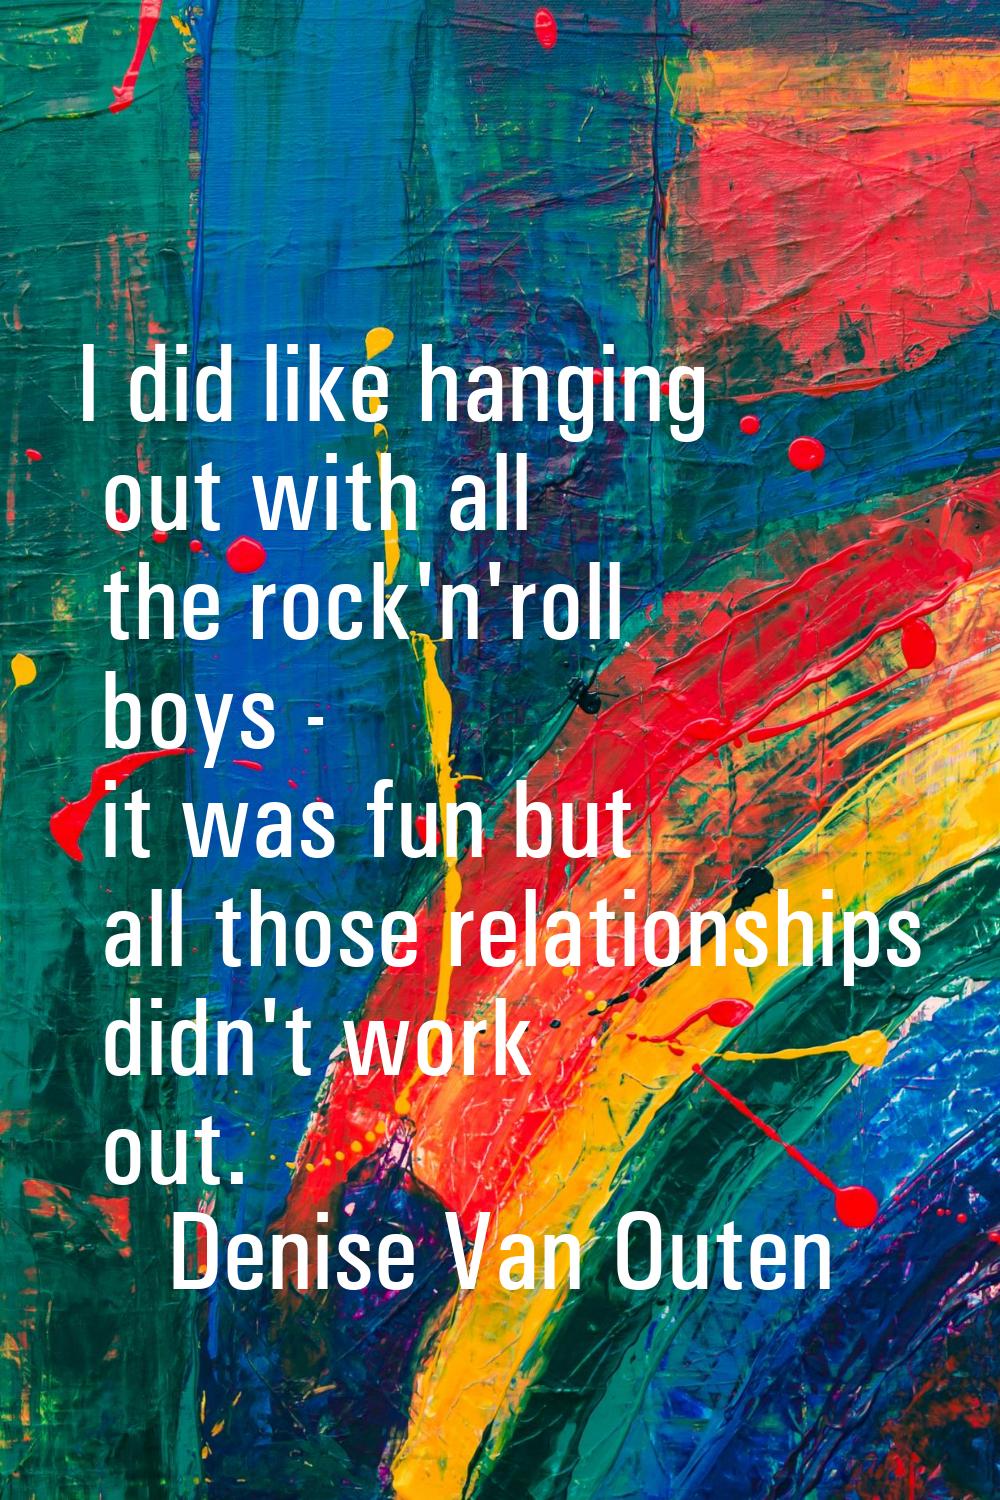 I did like hanging out with all the rock'n'roll boys - it was fun but all those relationships didn'